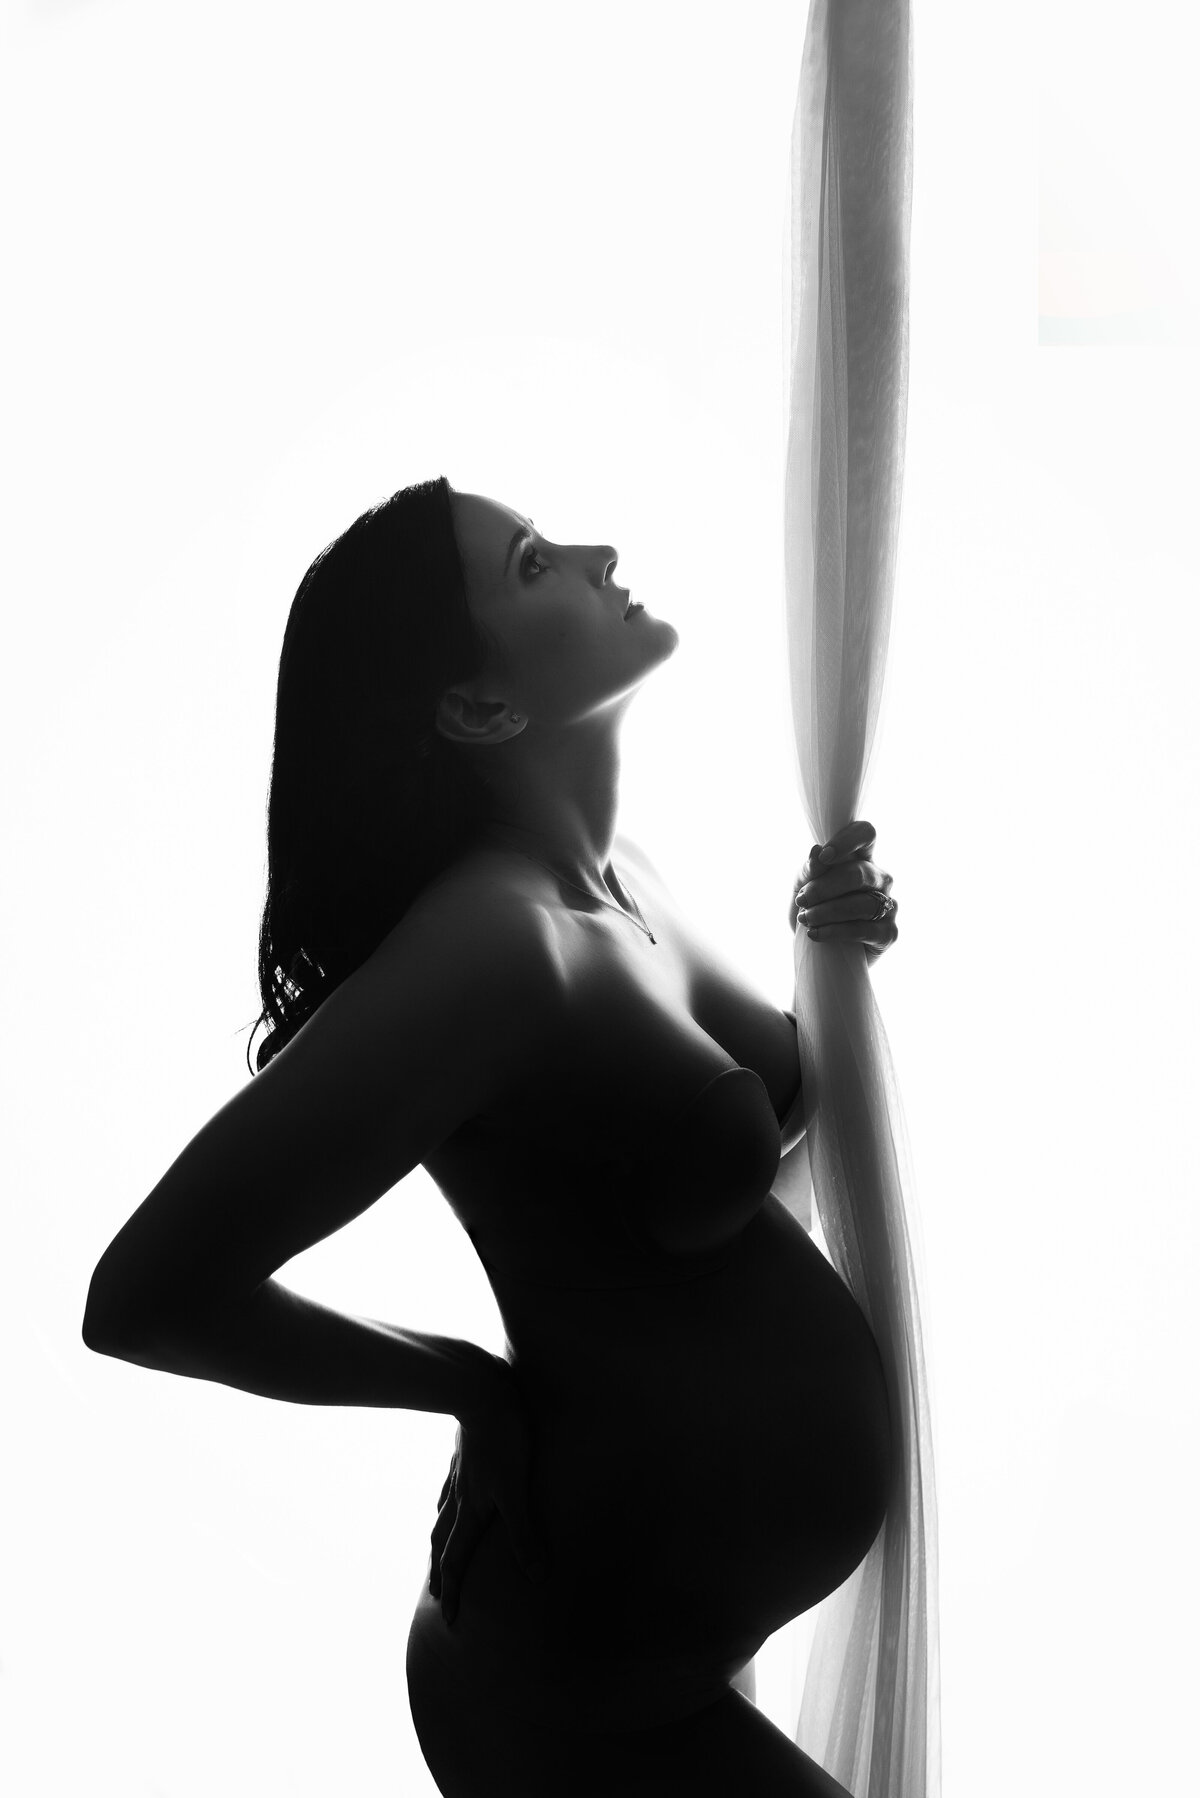 Pregnancy portrait in black and white with 30 week pregnant woman standing to side showing her baby bump with hand on lower back and other hand holding sheer fabric